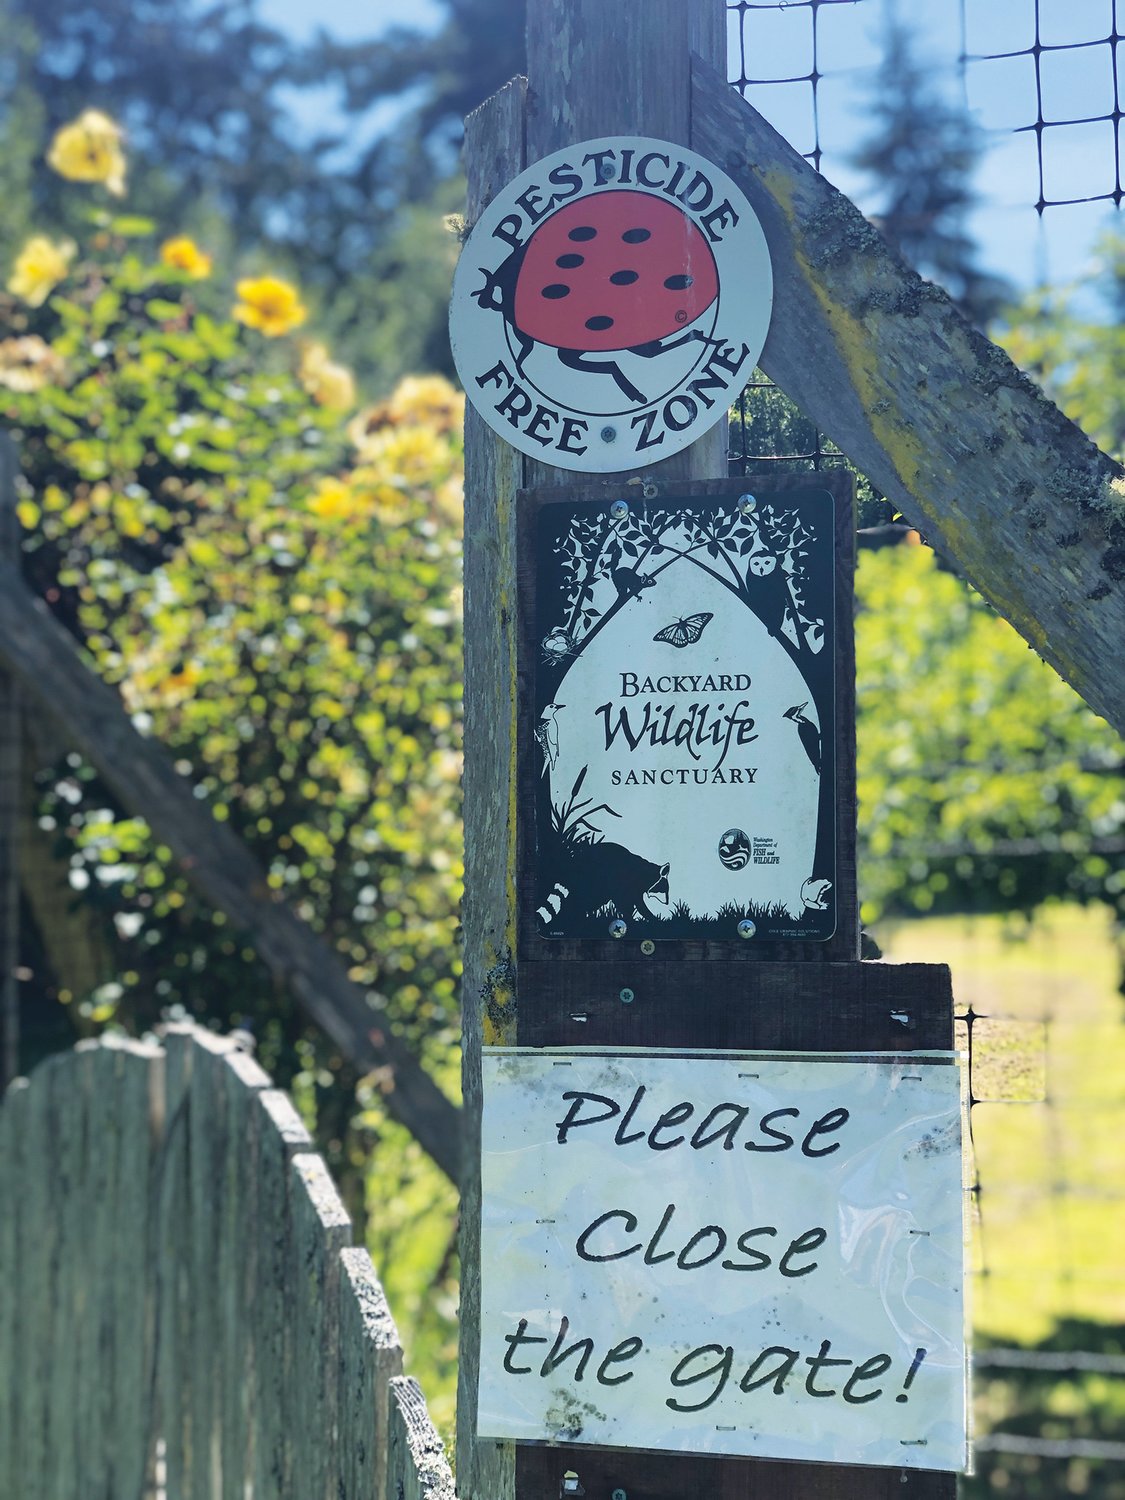 Friendly insects, controlled burns and organic practices keep the Alpenfire orchard a healthy place not just for apples, but for critters of all kinds.